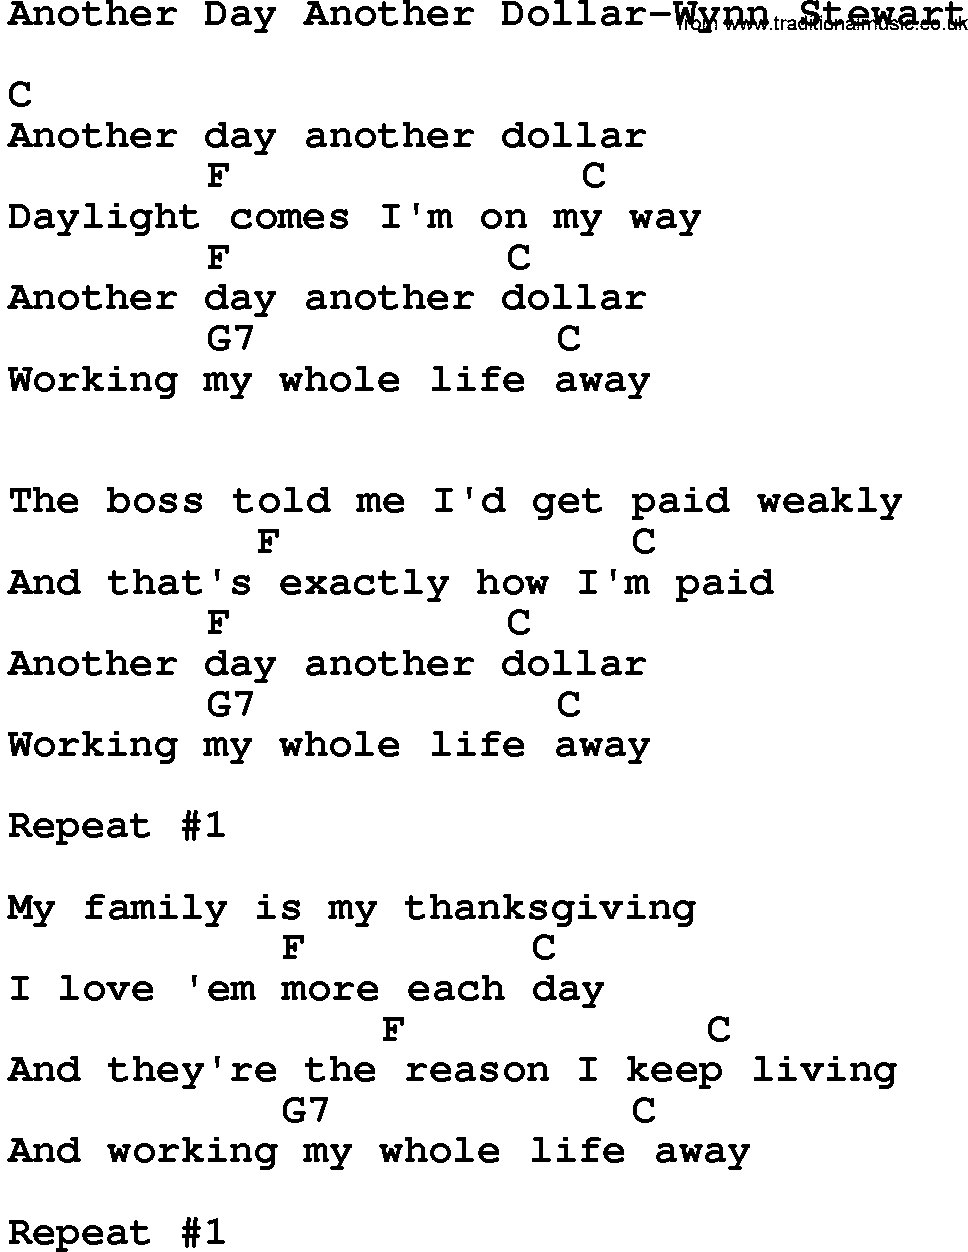 Country music song: Another Day Another Dollar-Wynn Stewart lyrics and chords